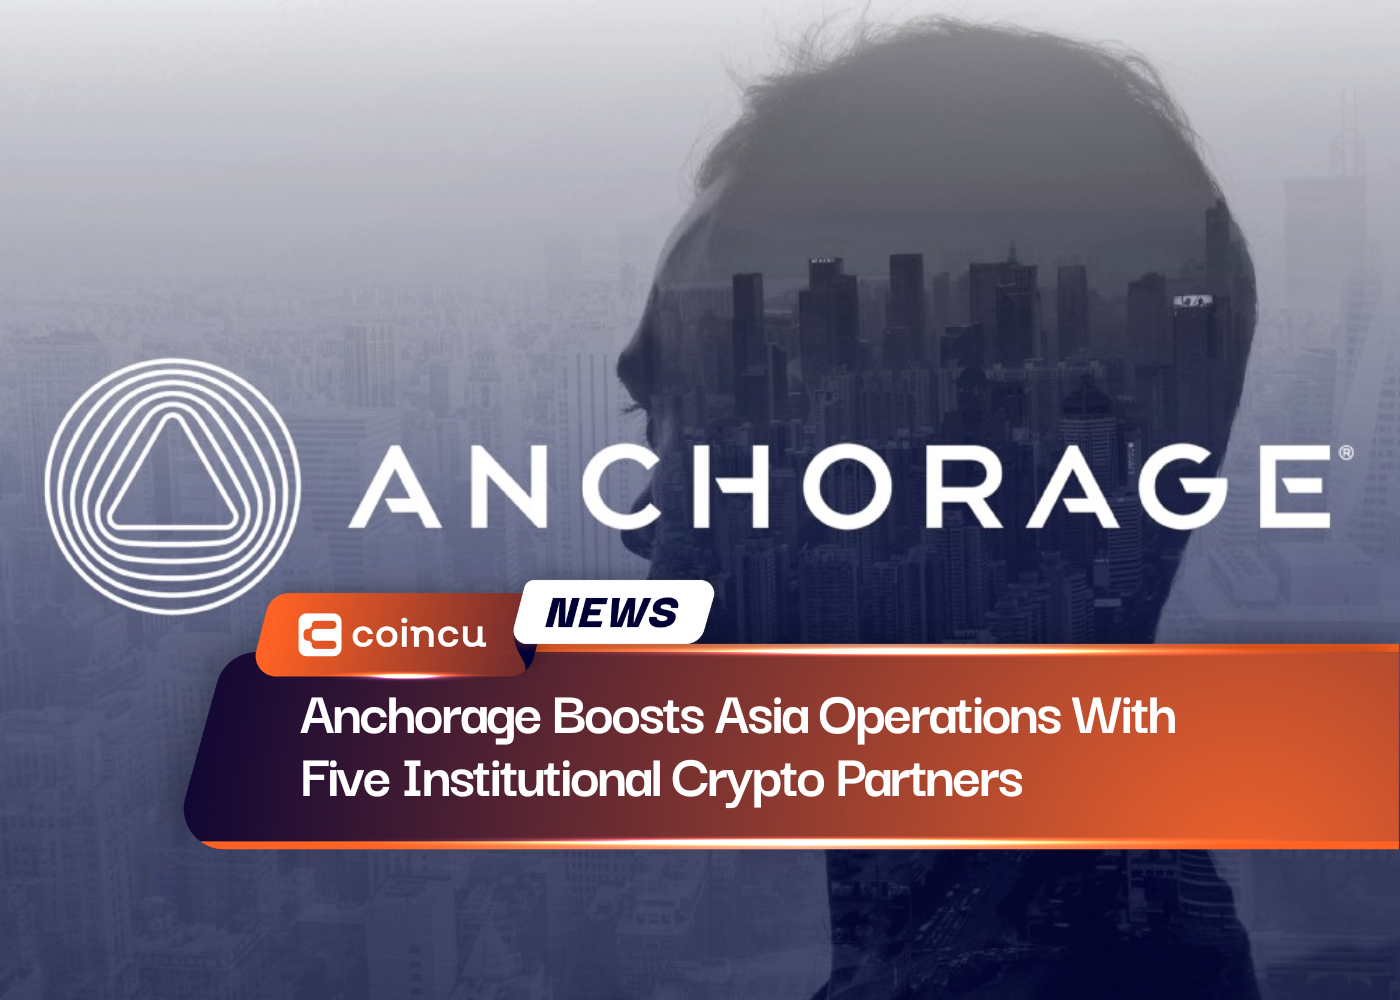 Anchorage Boosts Asia Operations With Five Institutional Crypto Partners